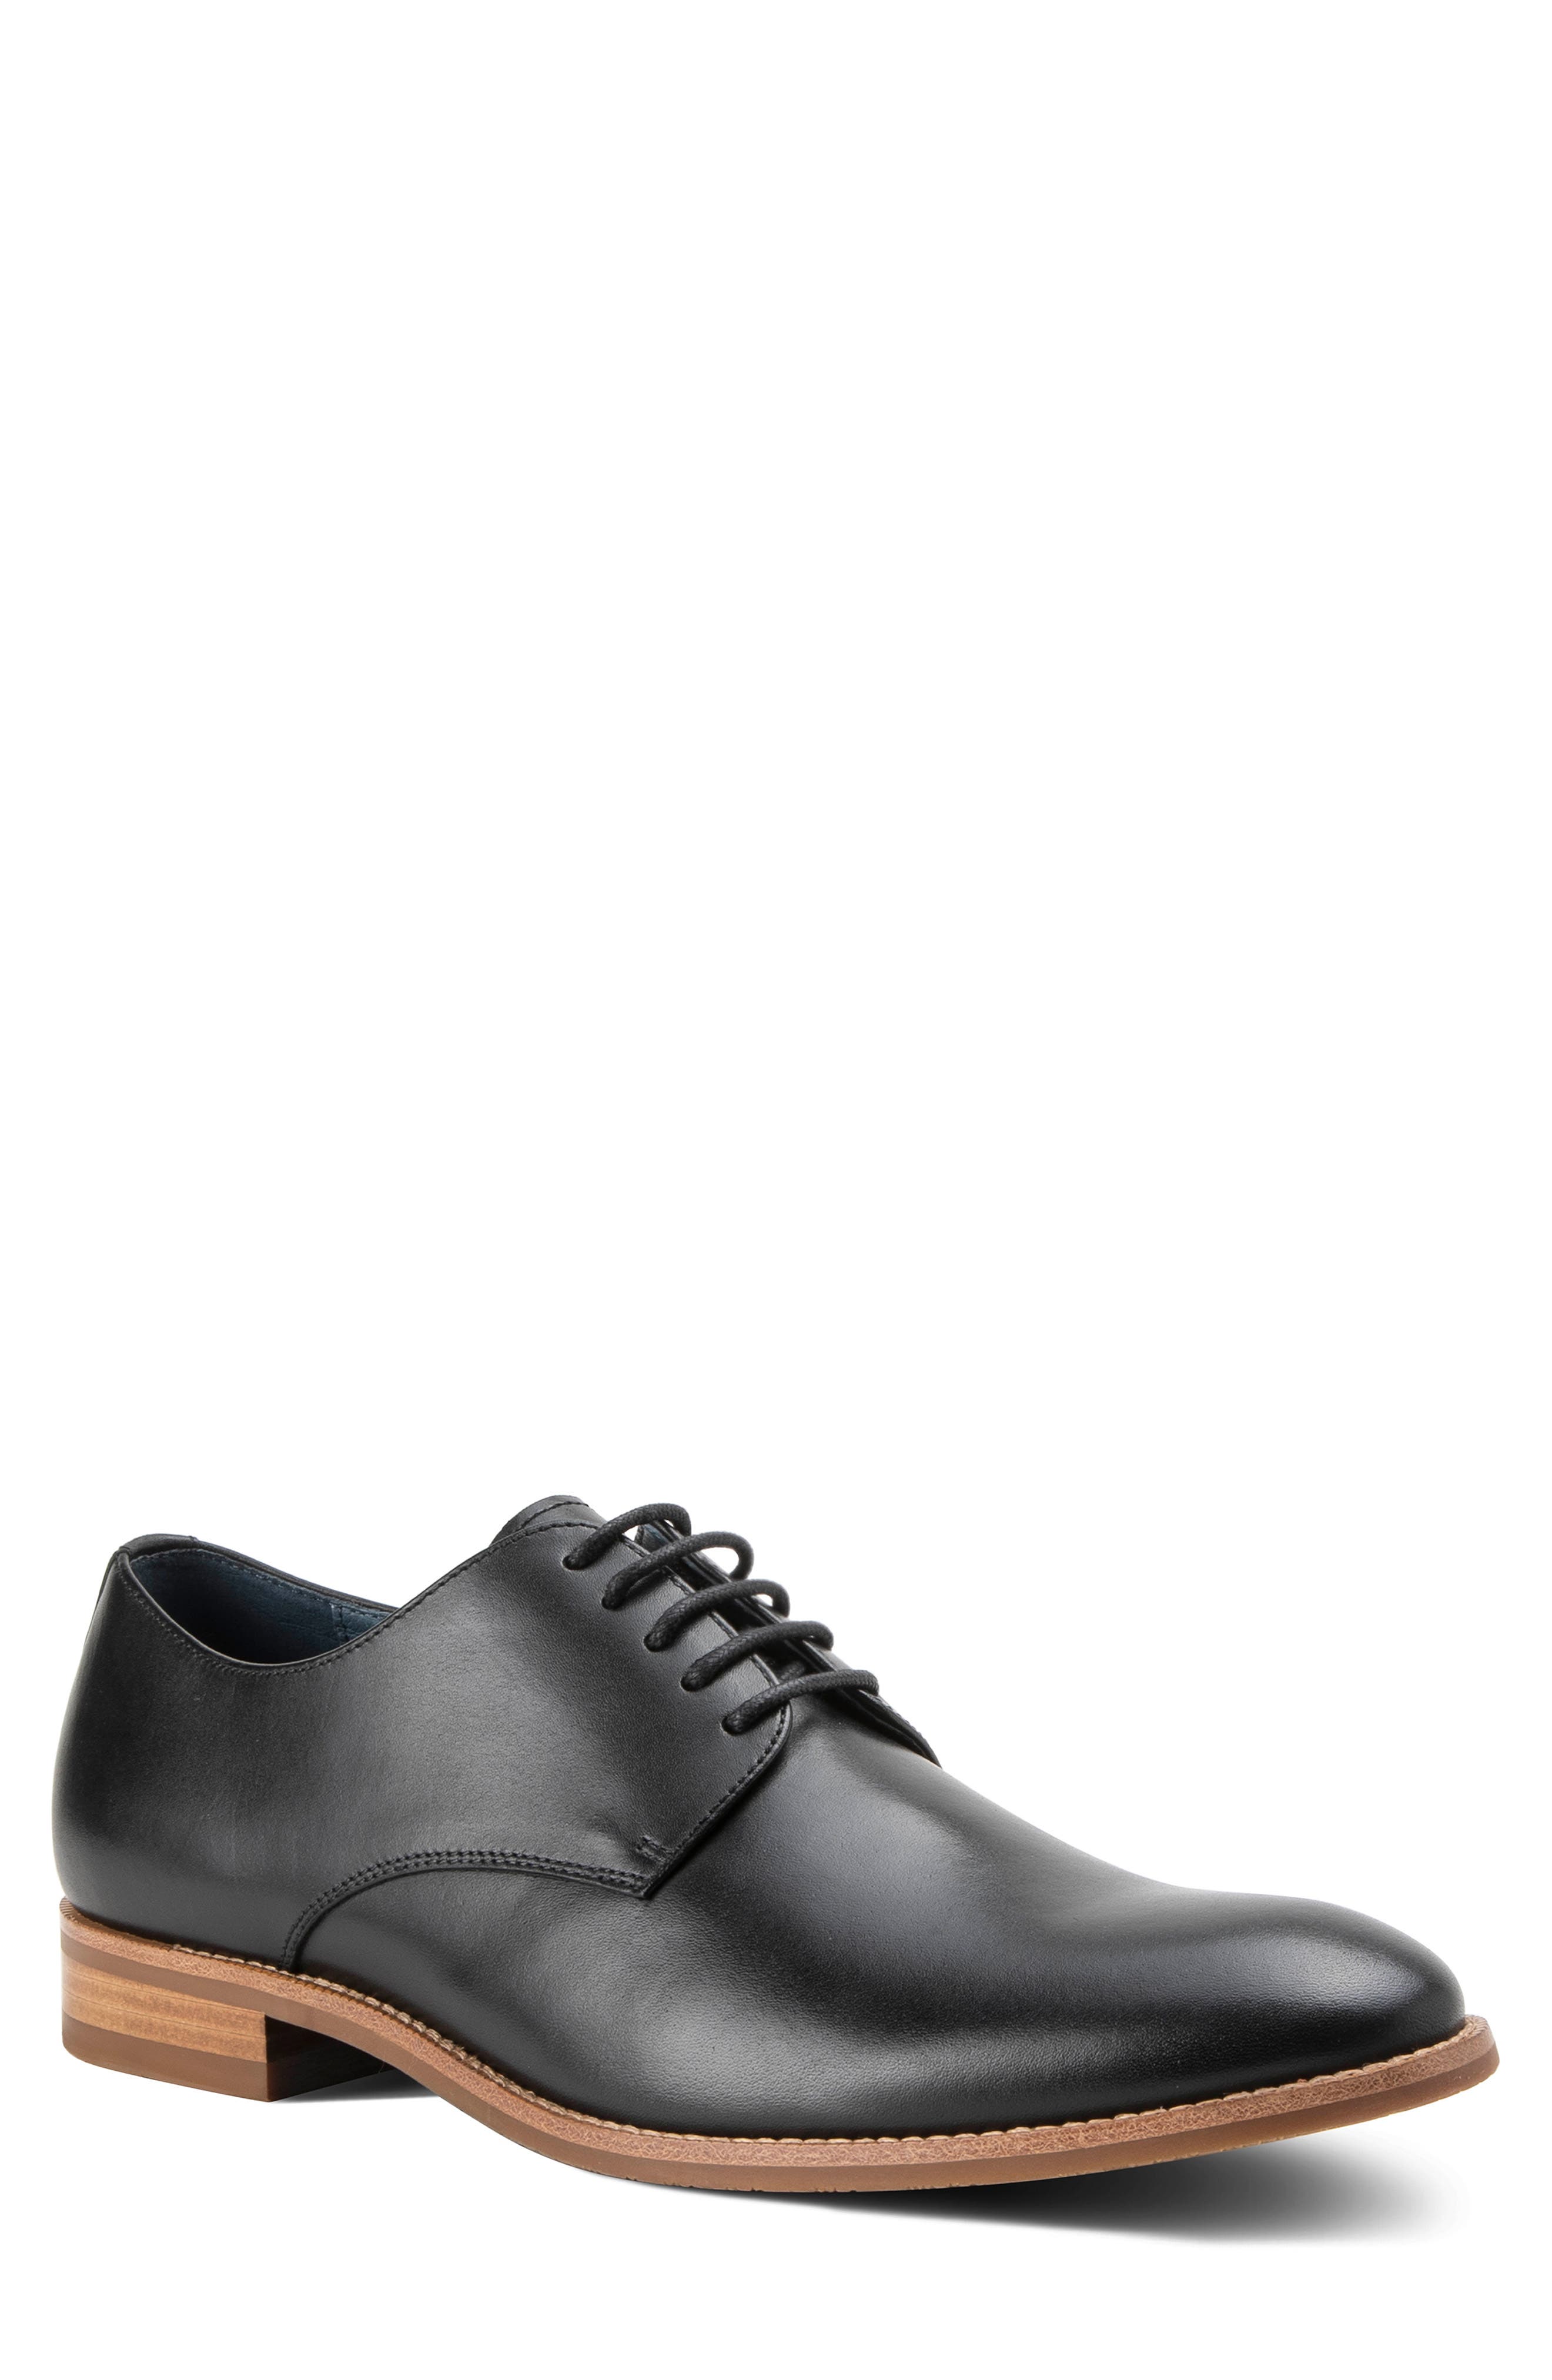 New Mooda Basic Simple Dress Casual Mens Leahter Formal Shoes Black 